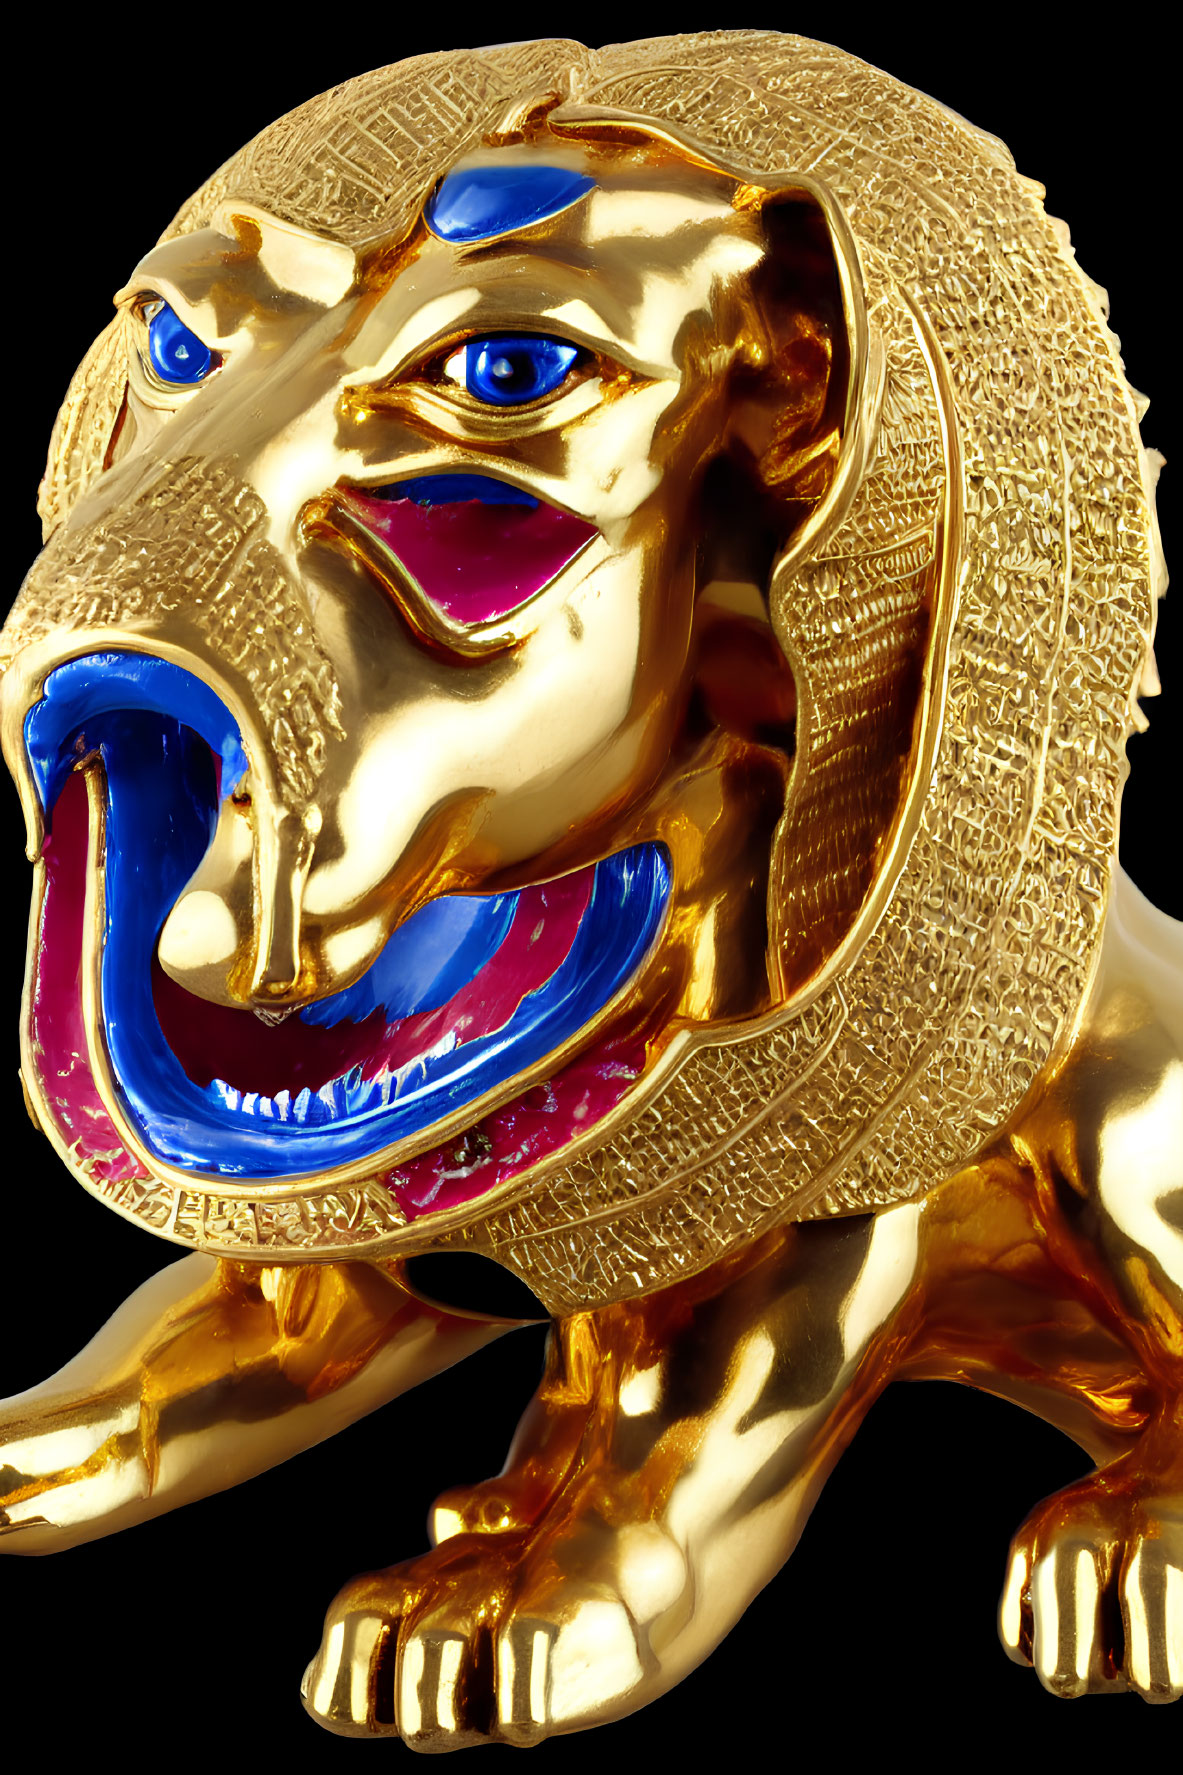 Golden lion statue with blue eyes and sun-like mane on black background